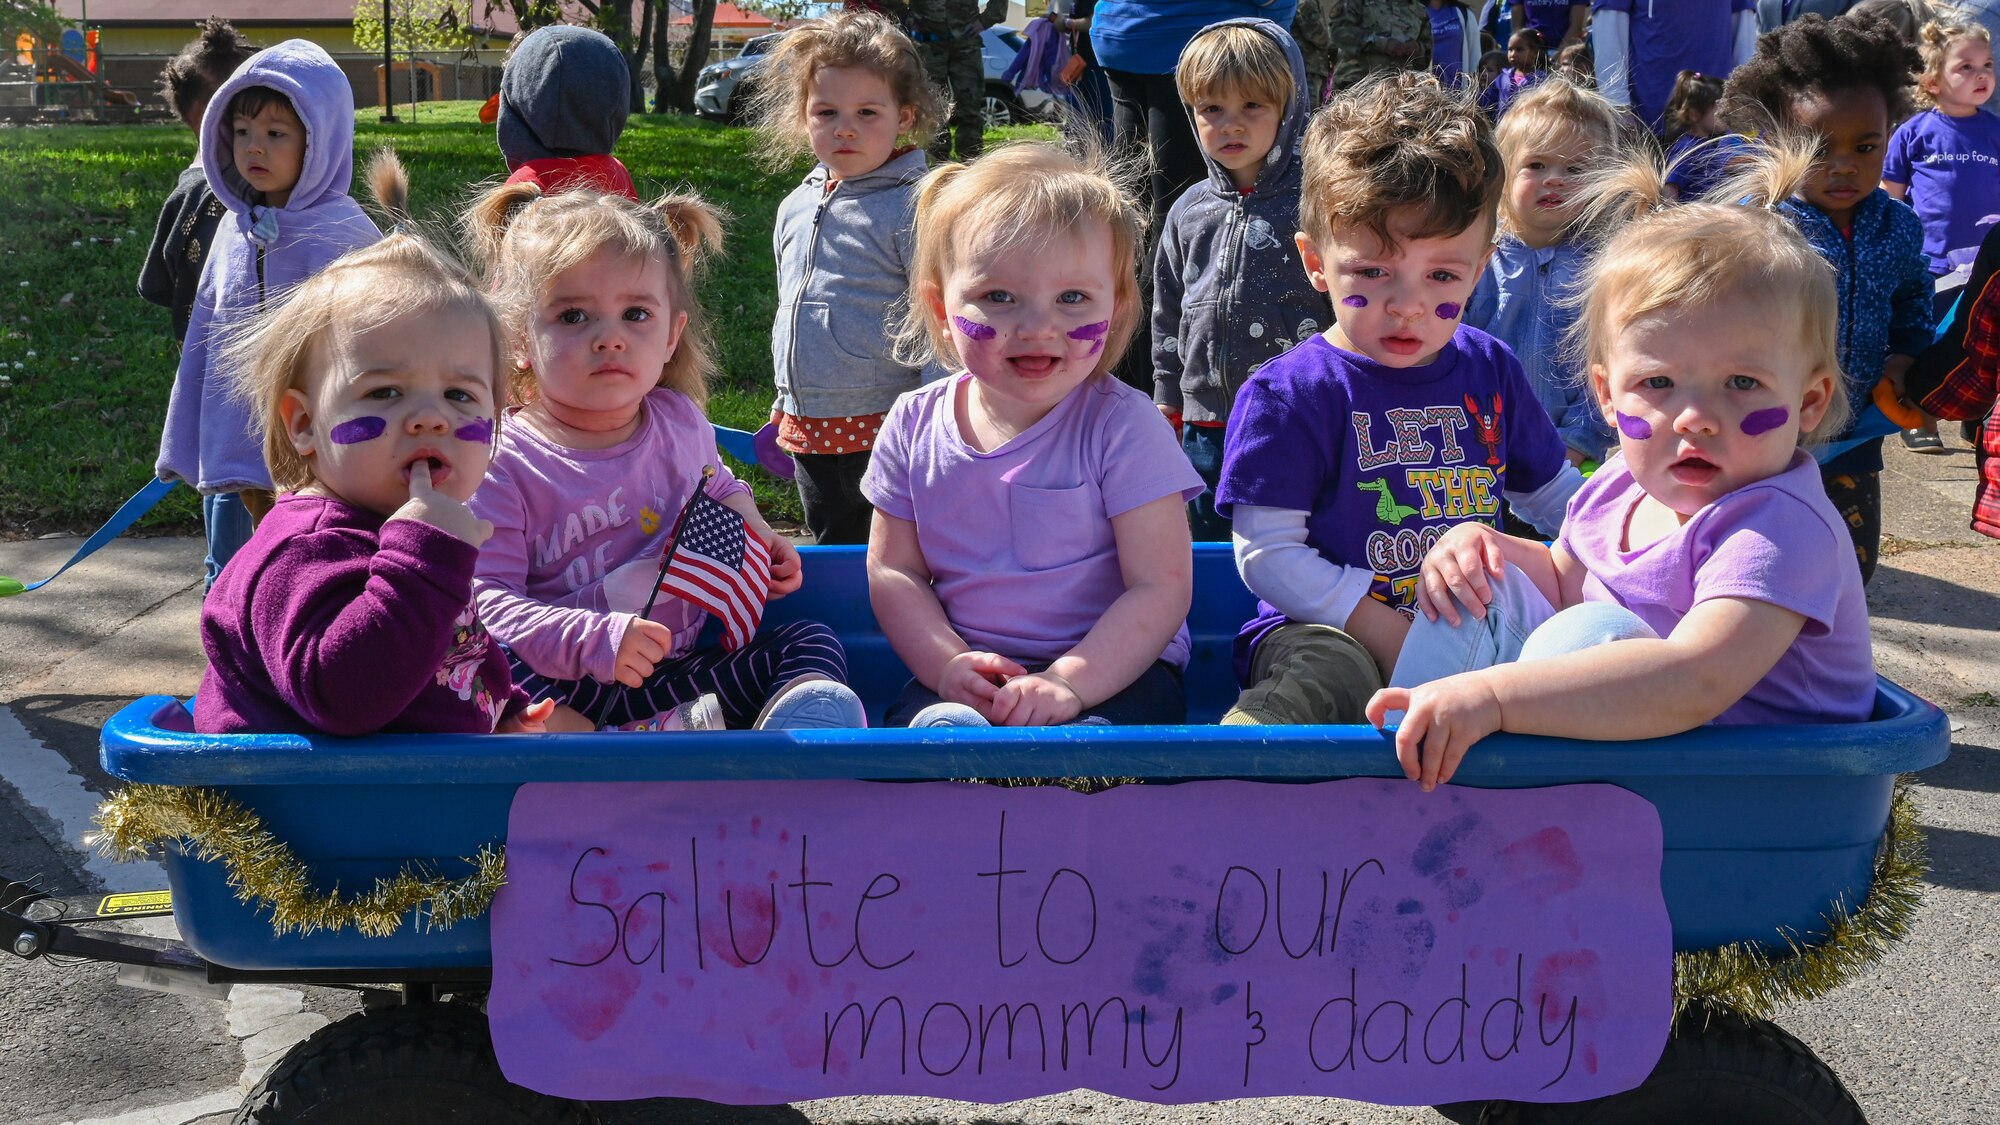 Military children pose for a photo during the Military Child Parade at Barksdale Air Force Base, Louisiana, April 1, 2021.